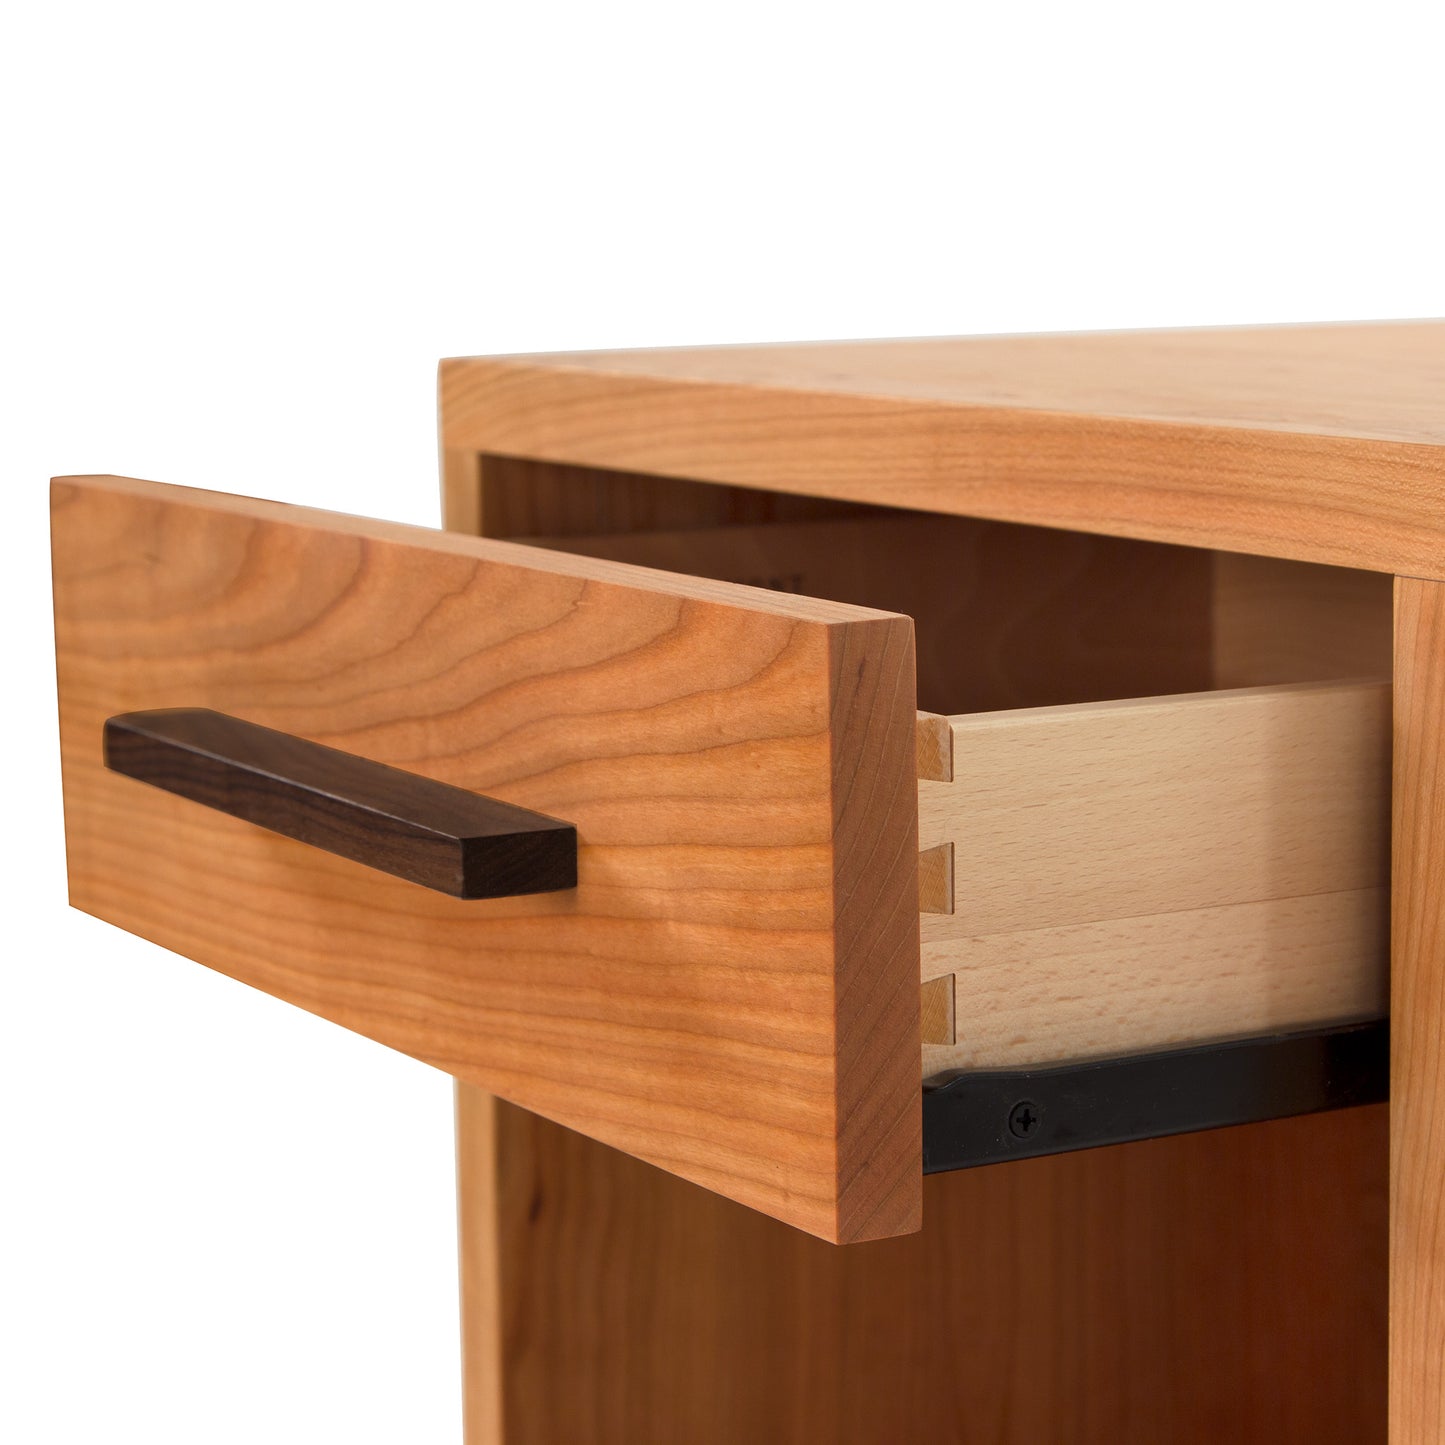 A Modern American 1-Drawer Enclosed Shelf Nightstand with an open drawer by Vermont Furniture Designs.